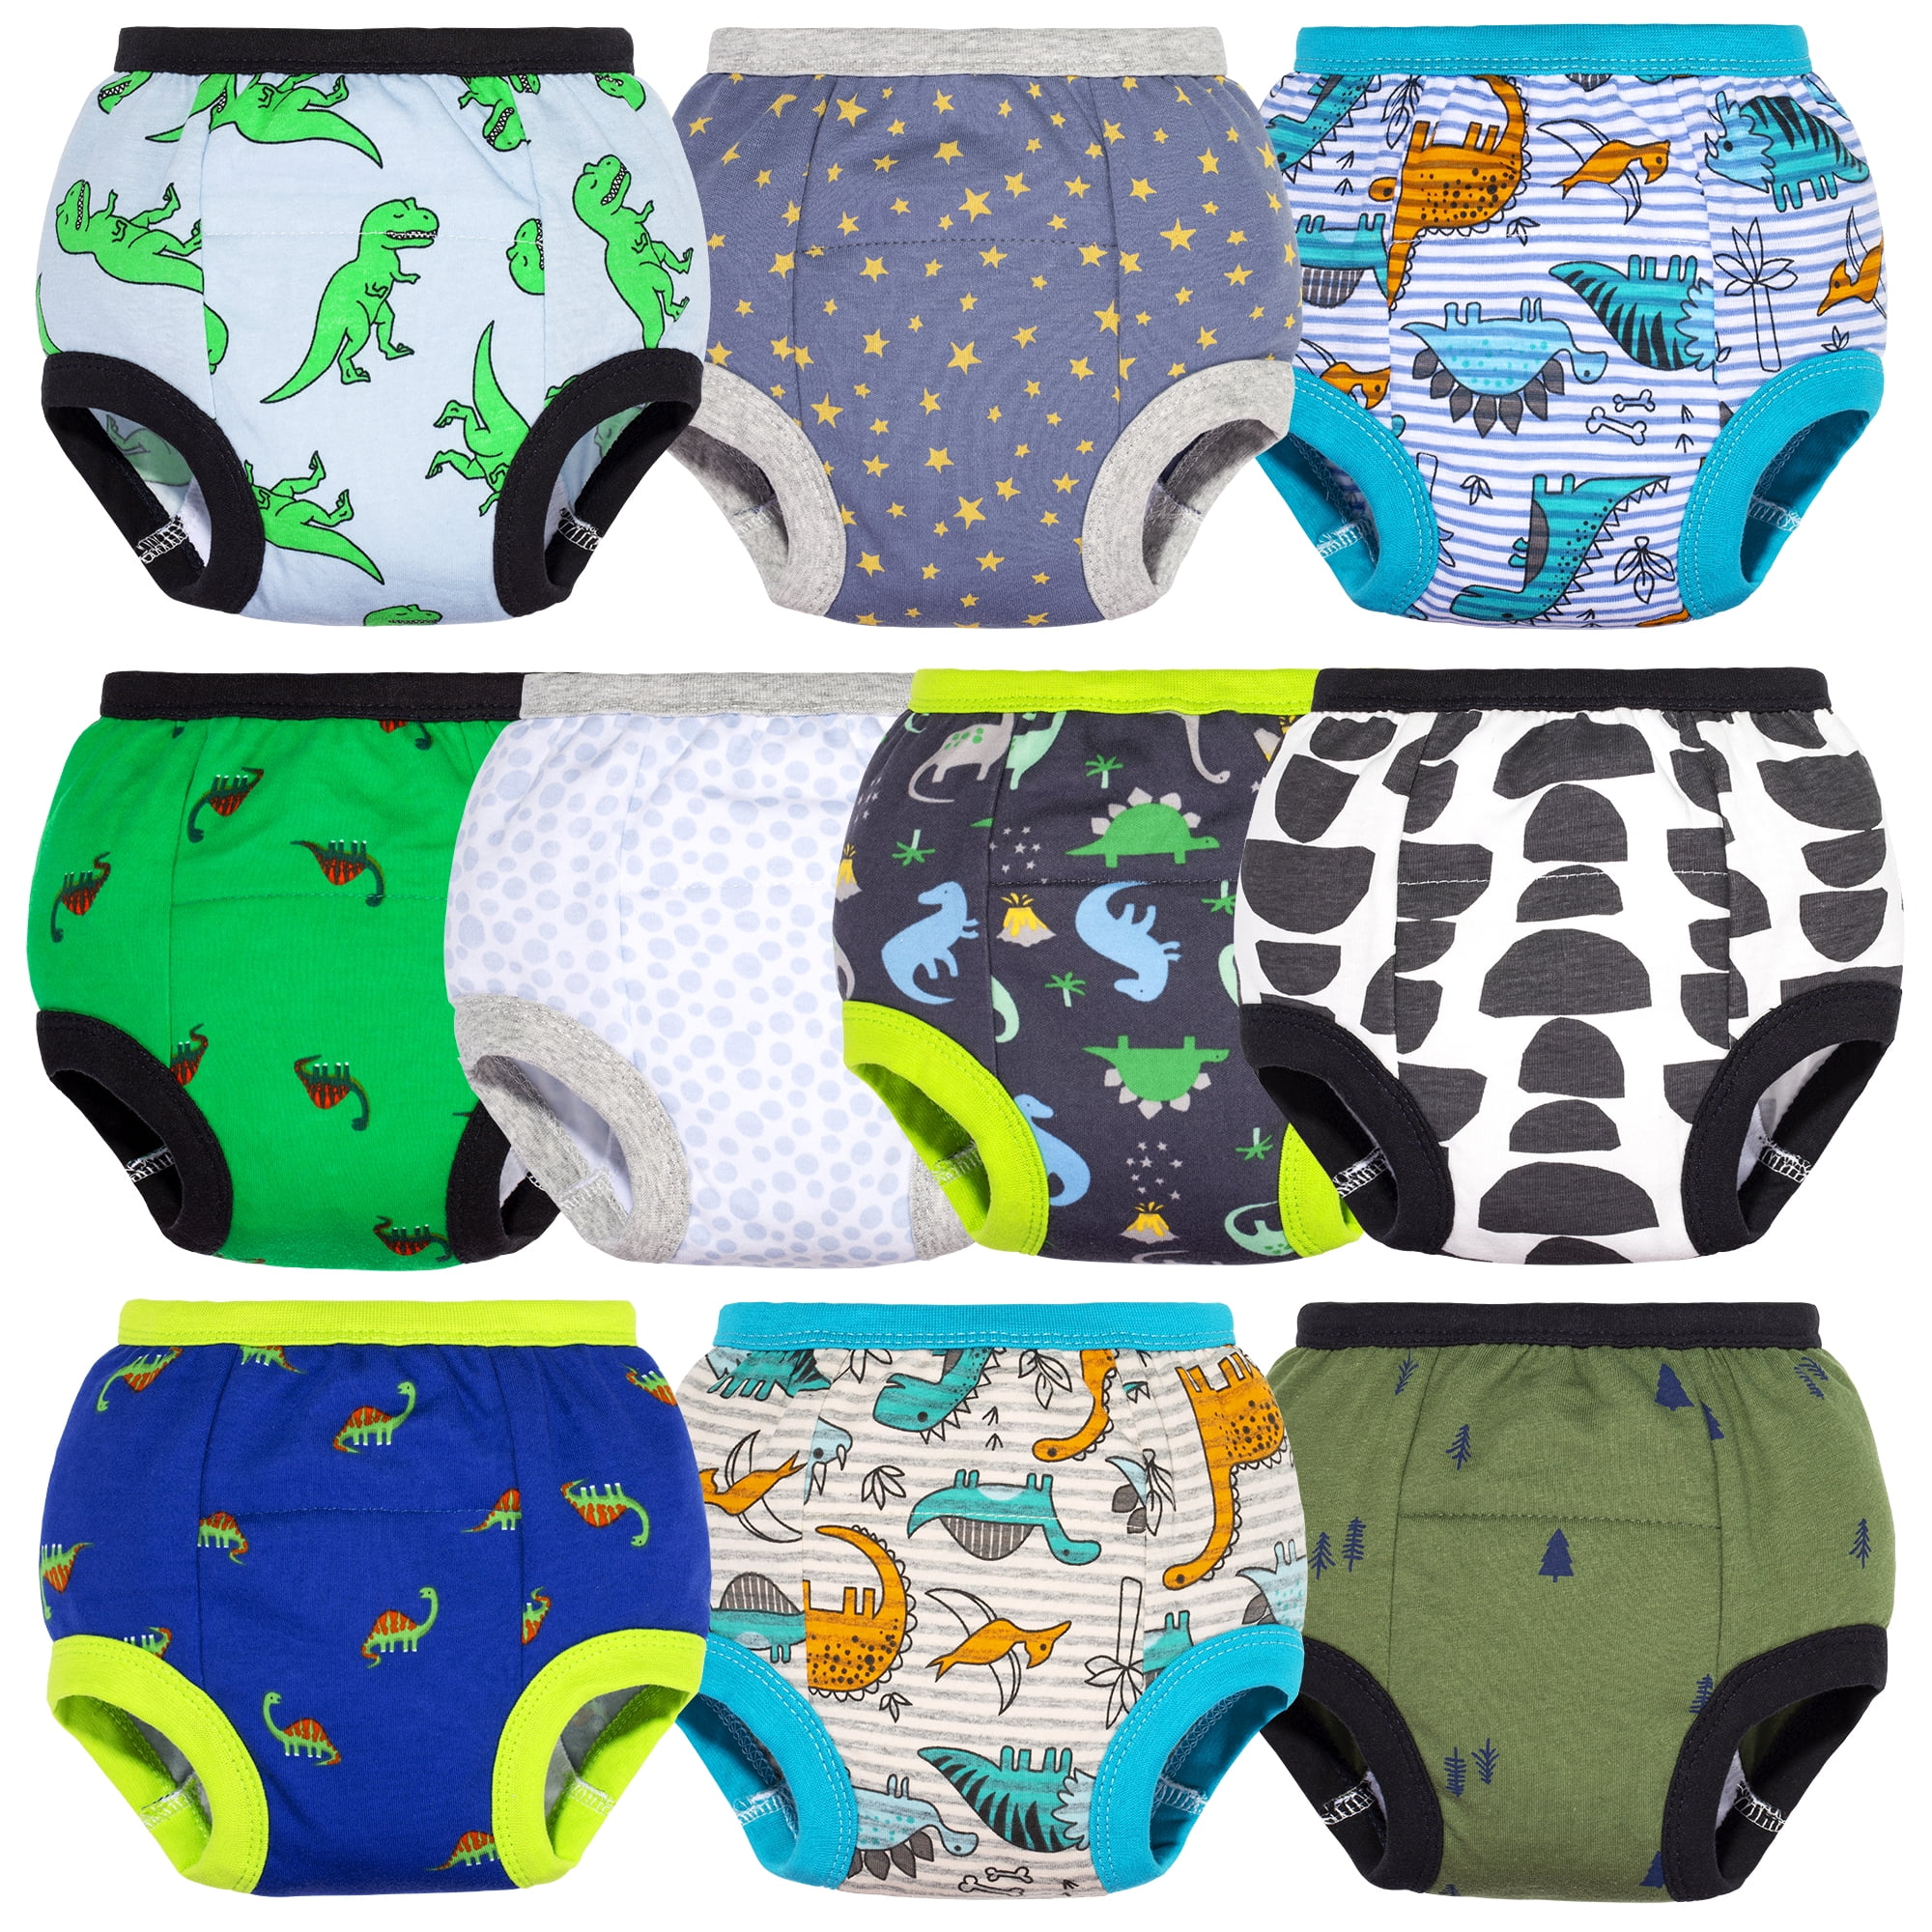 GetUSCart- 6 Packs Cotton Training Pants Reusable Toddler Potty Training  Underwear for Boy and Girl Dinosaur-3T